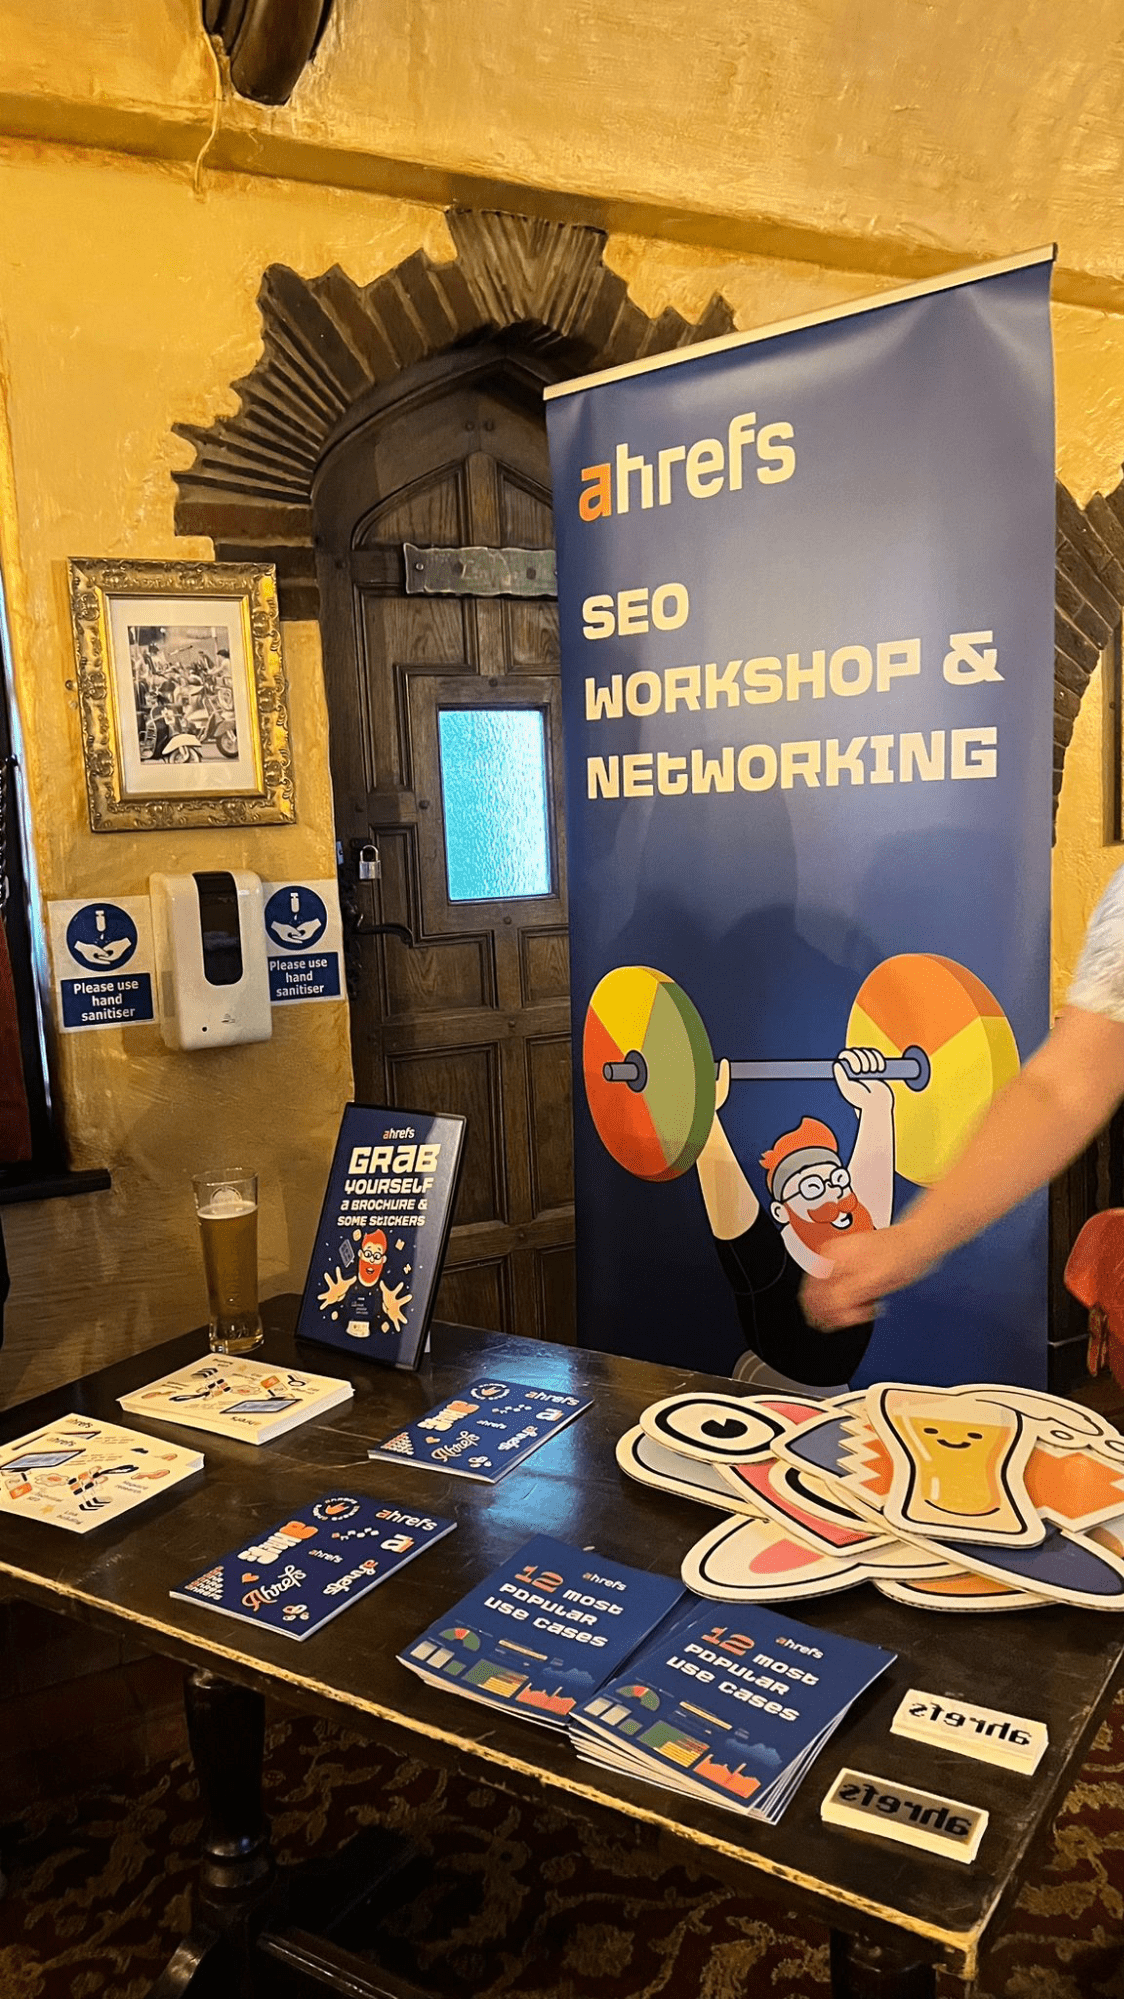 Banner and swag at the Ahrefs workshop